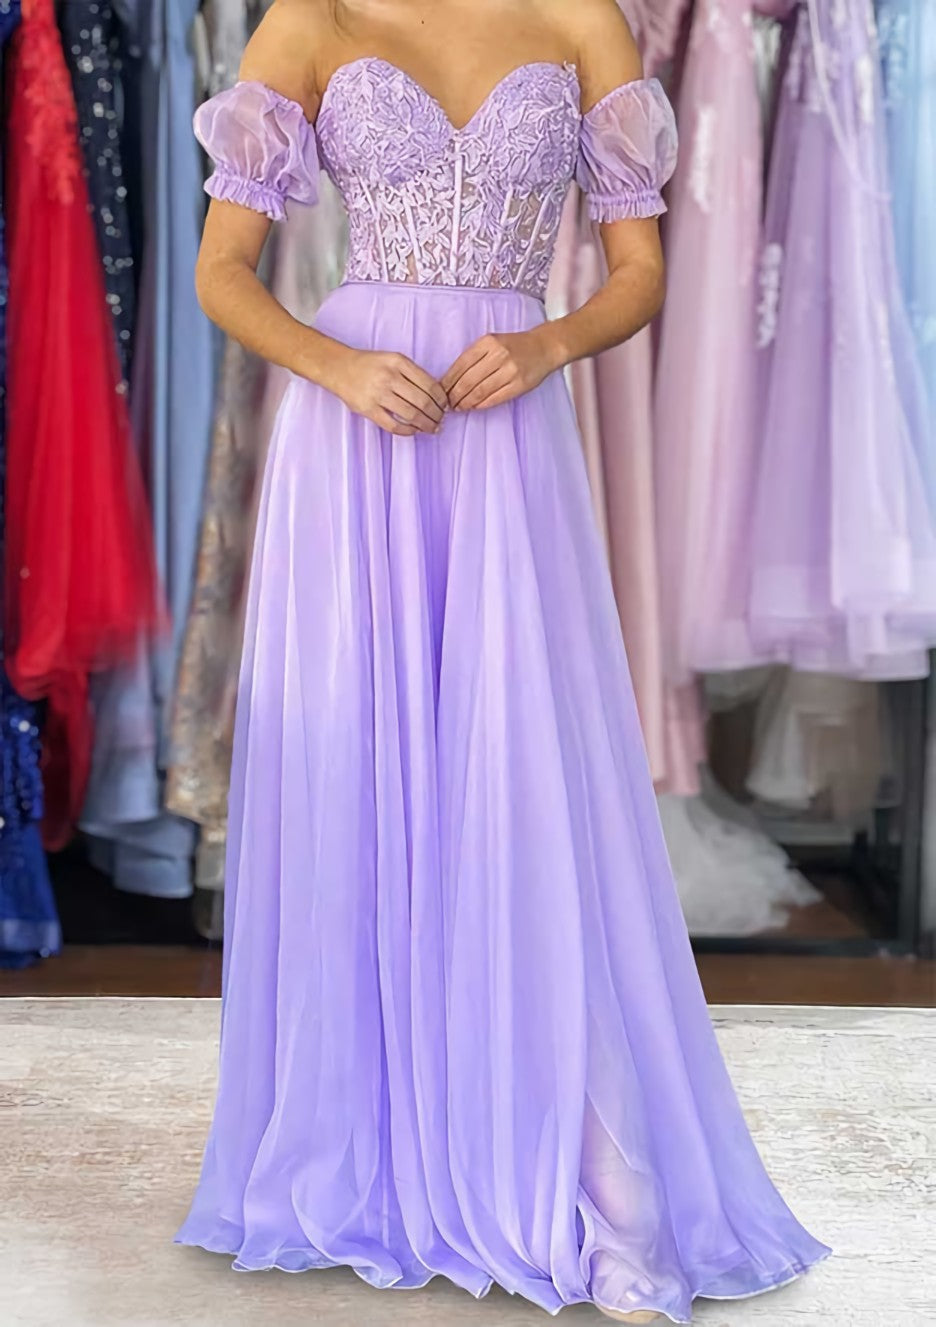 A-line Sweetheart Strapless Long/Floor-Length Chiffon Corset Prom Dress with Detachable Balloon Sleeves Gowns, Homecoming Dress Classy Elegant